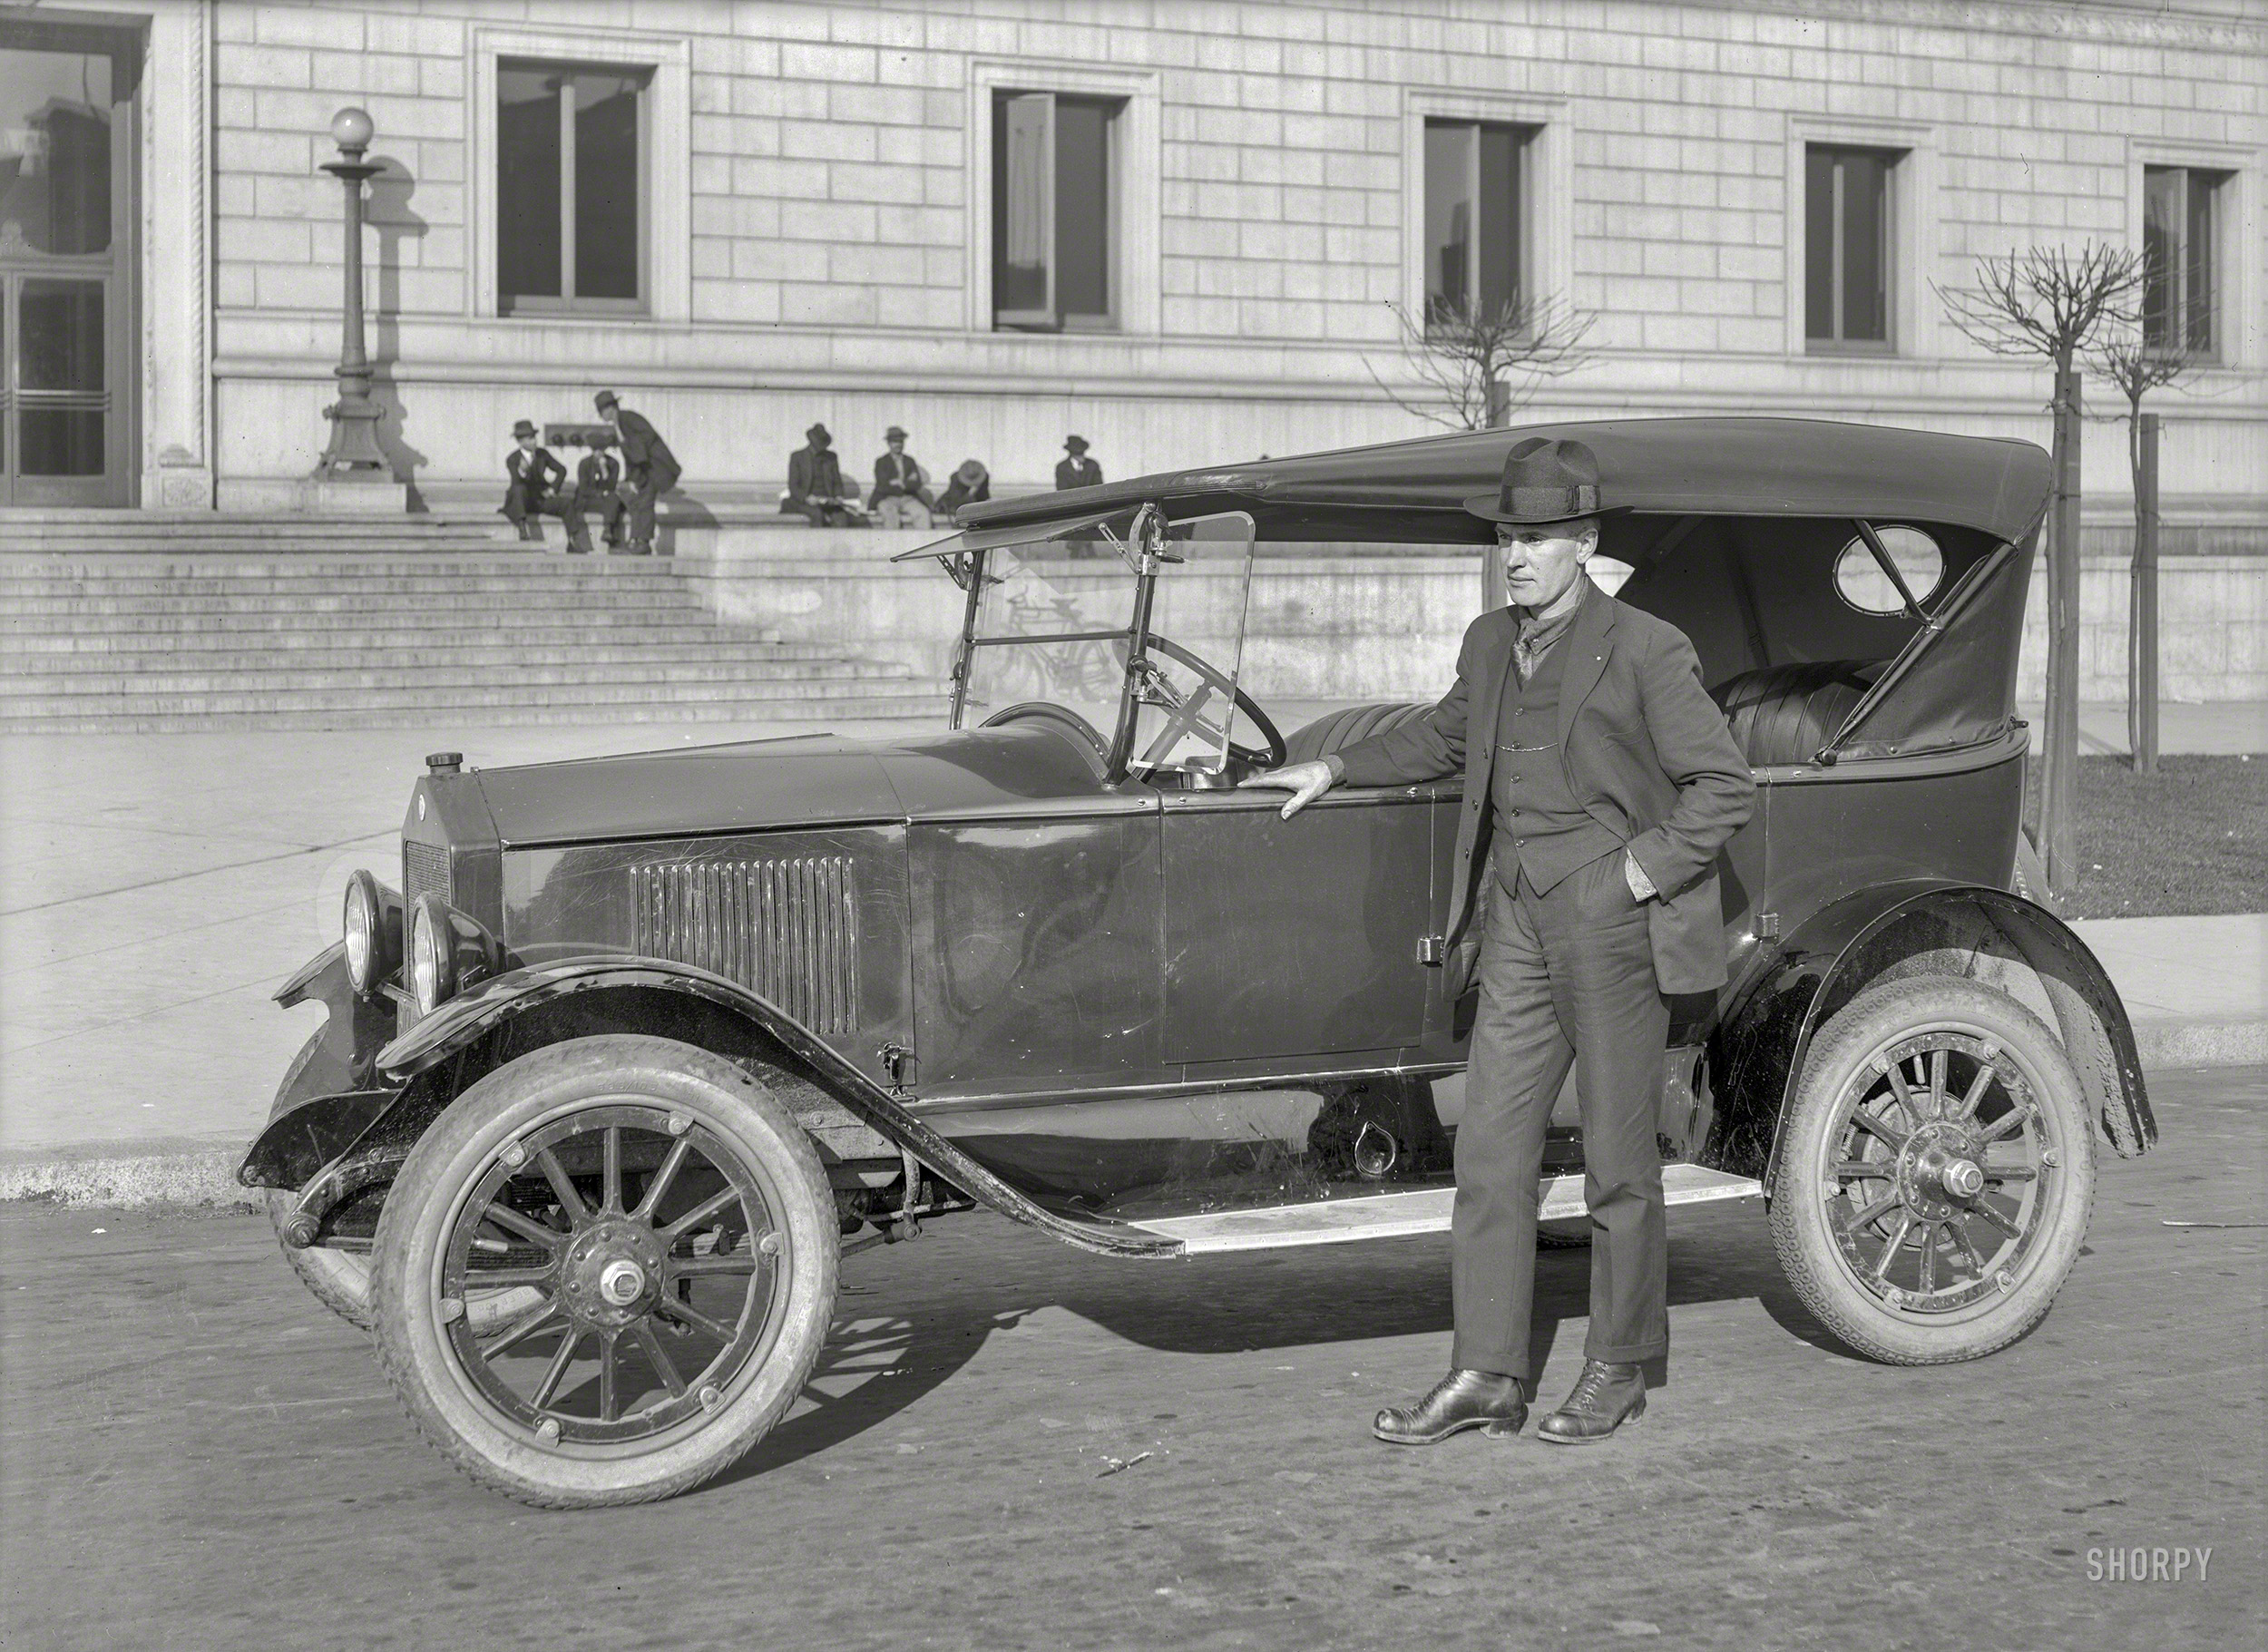 1921. "Dort touring car at San Francisco Public Library." Waiting for Marian to clock out. 5x7 glass negative by Christopher Helin. View full size.